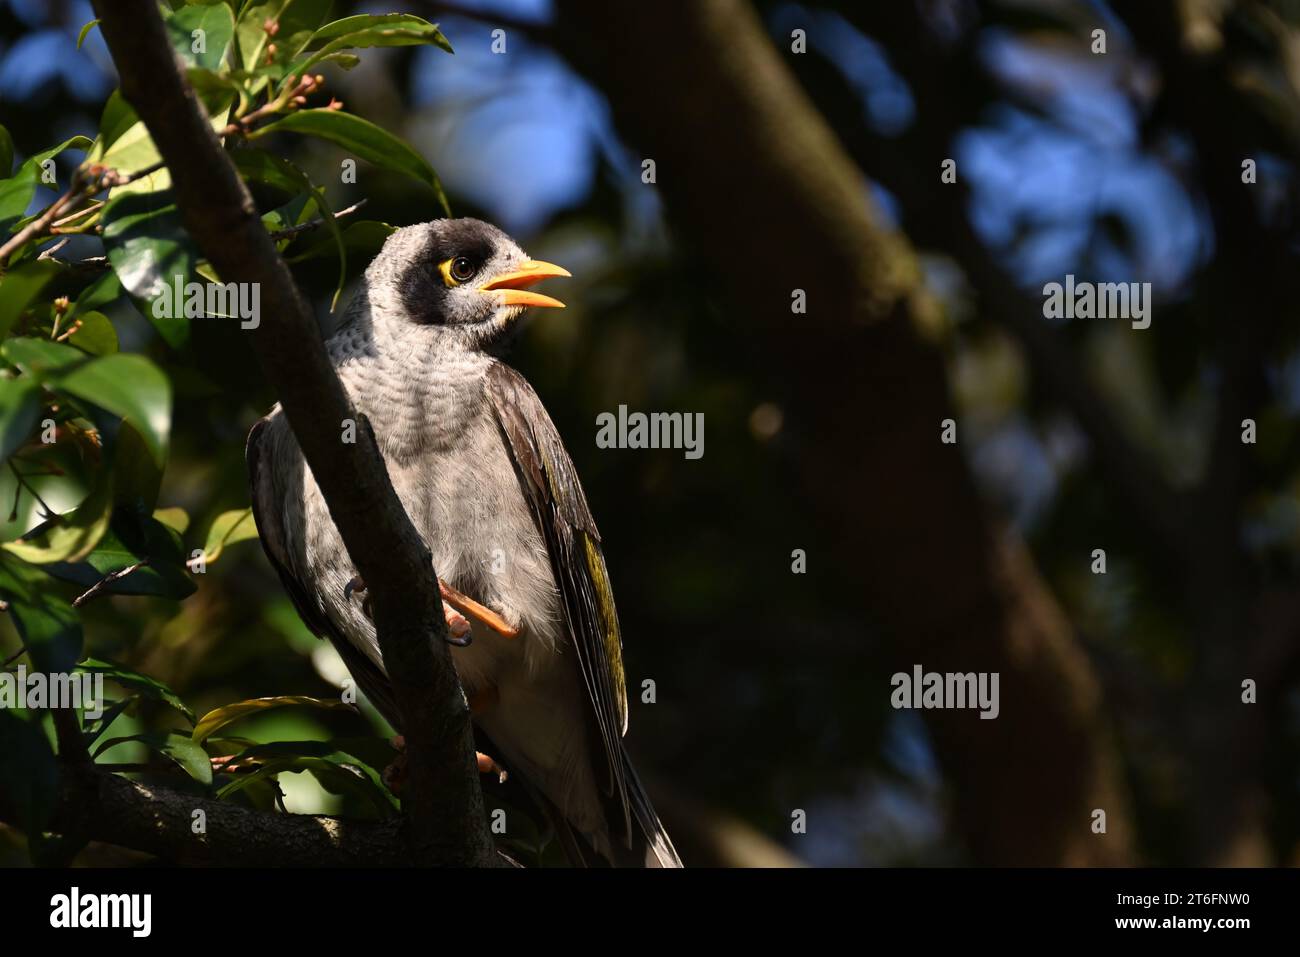 Sunlit noisy miner bird perched high up in a tree, its beak open Stock Photo